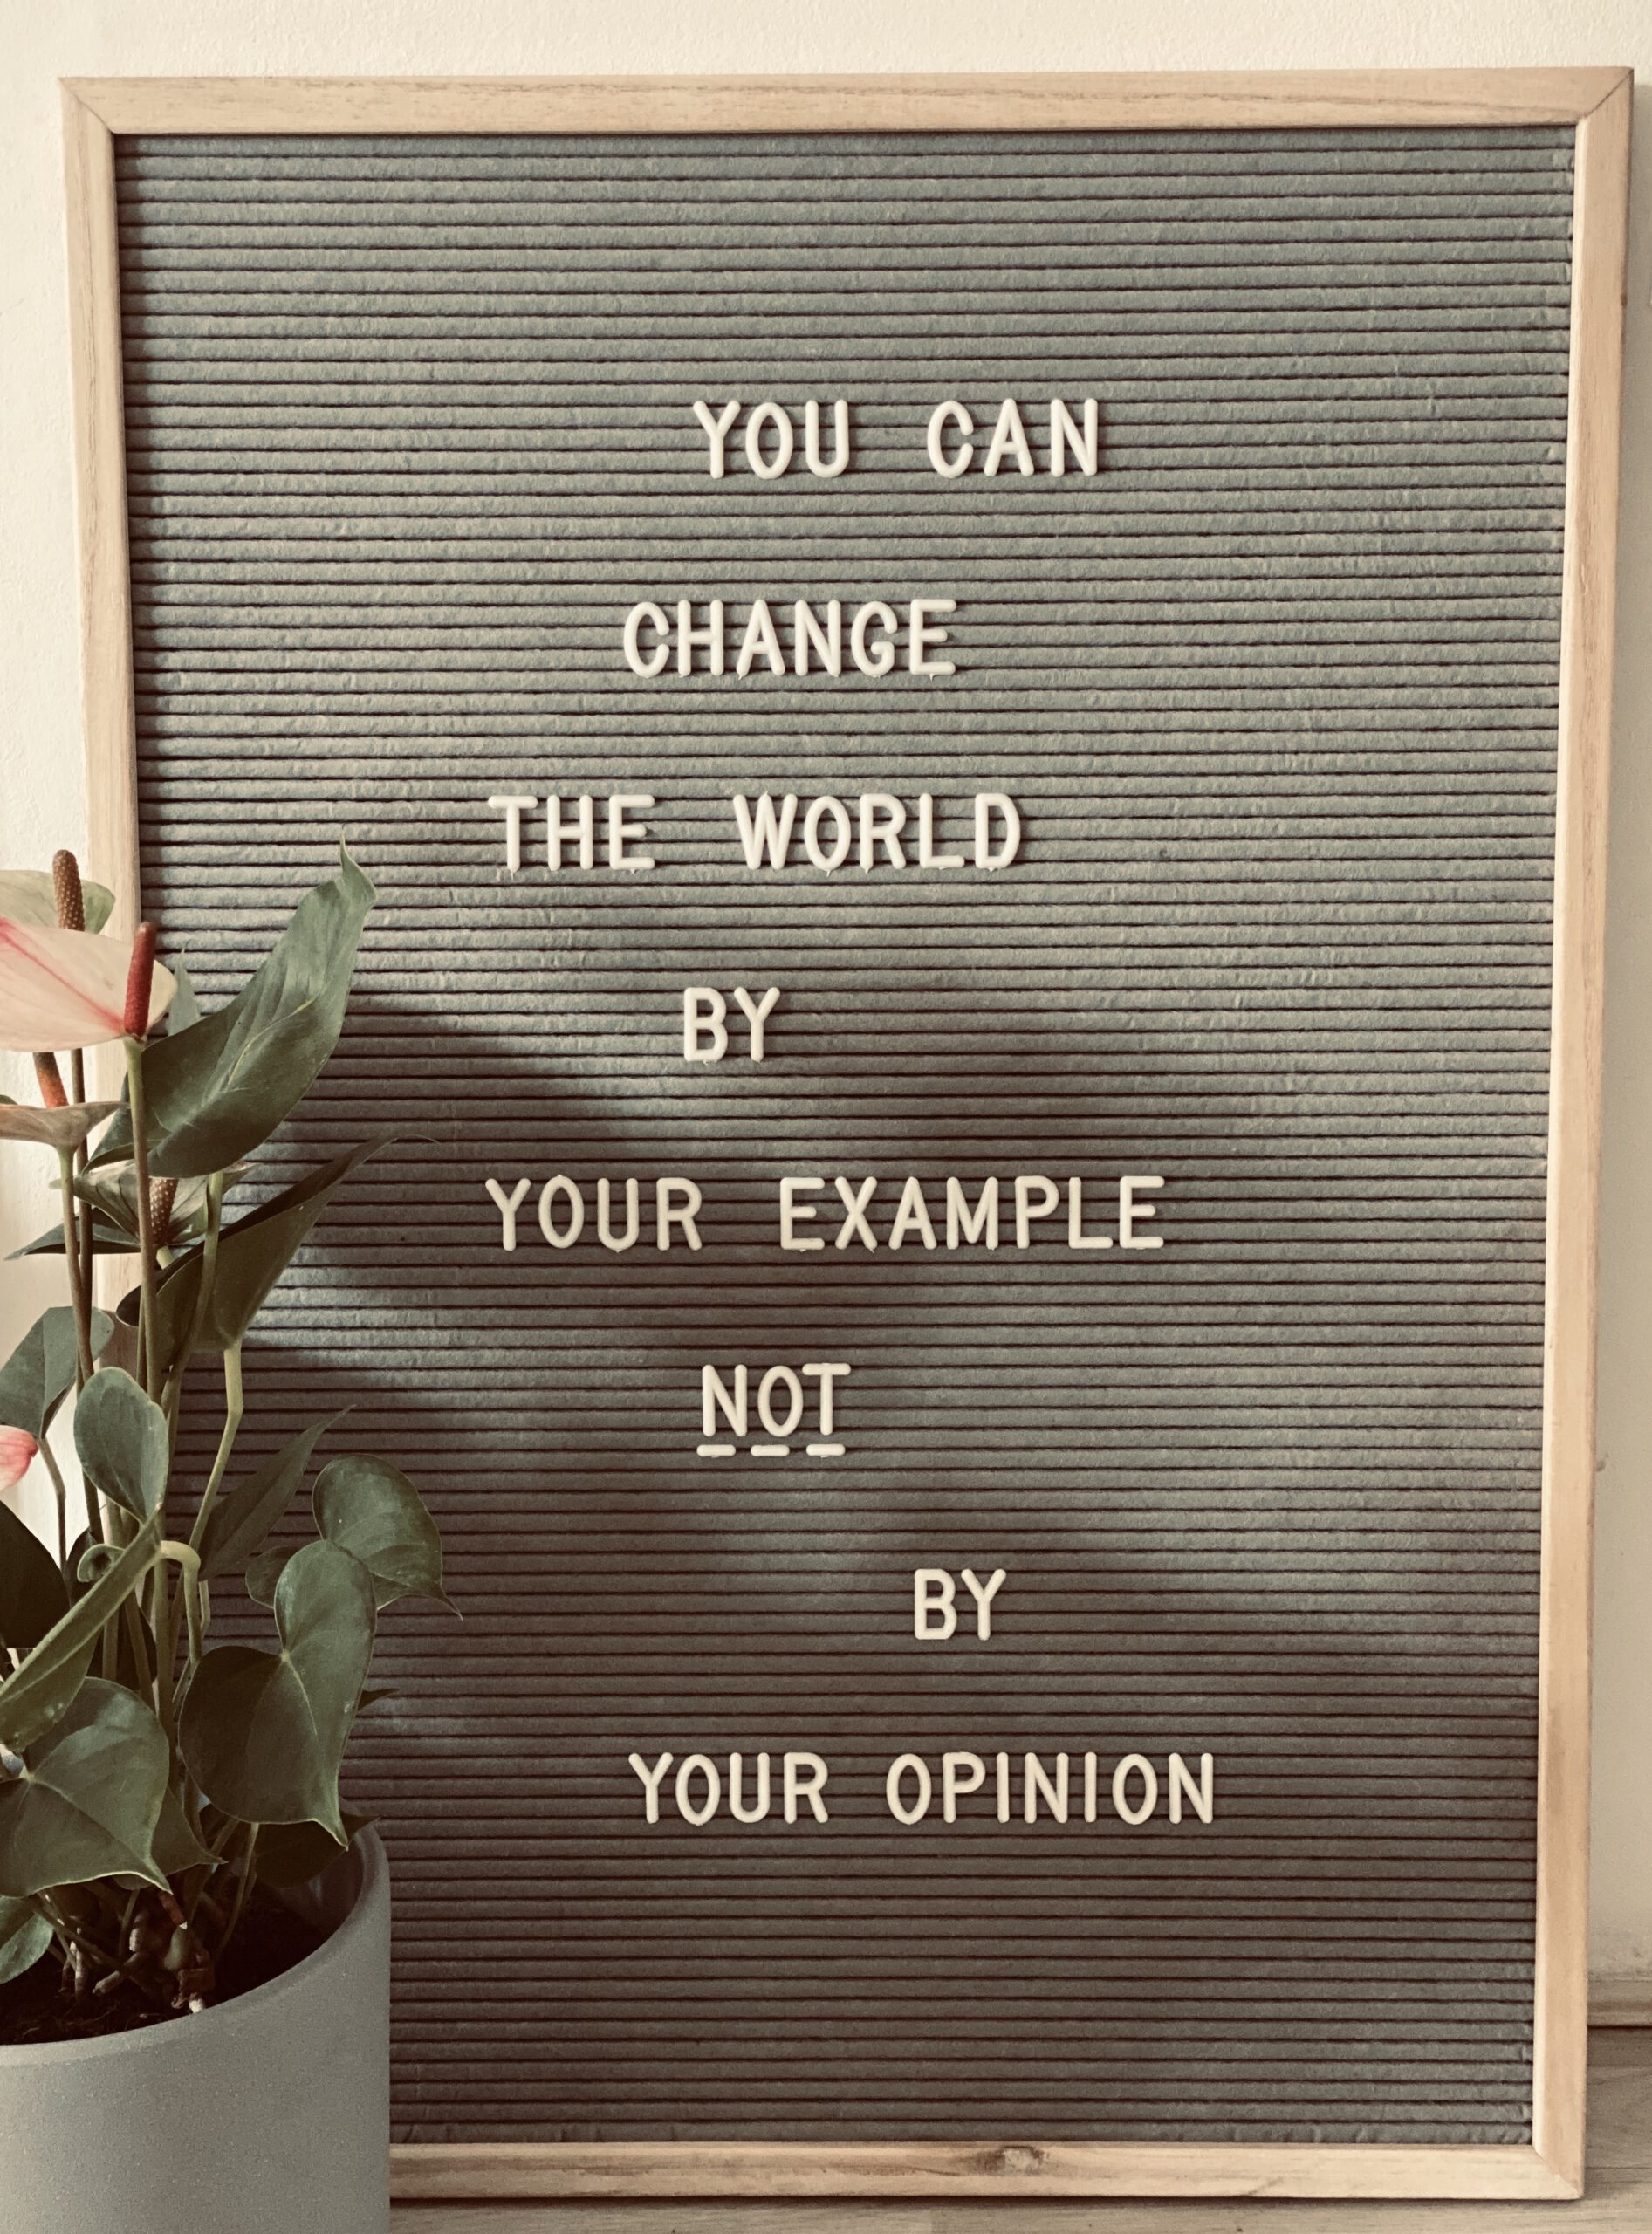 You can change the world by…